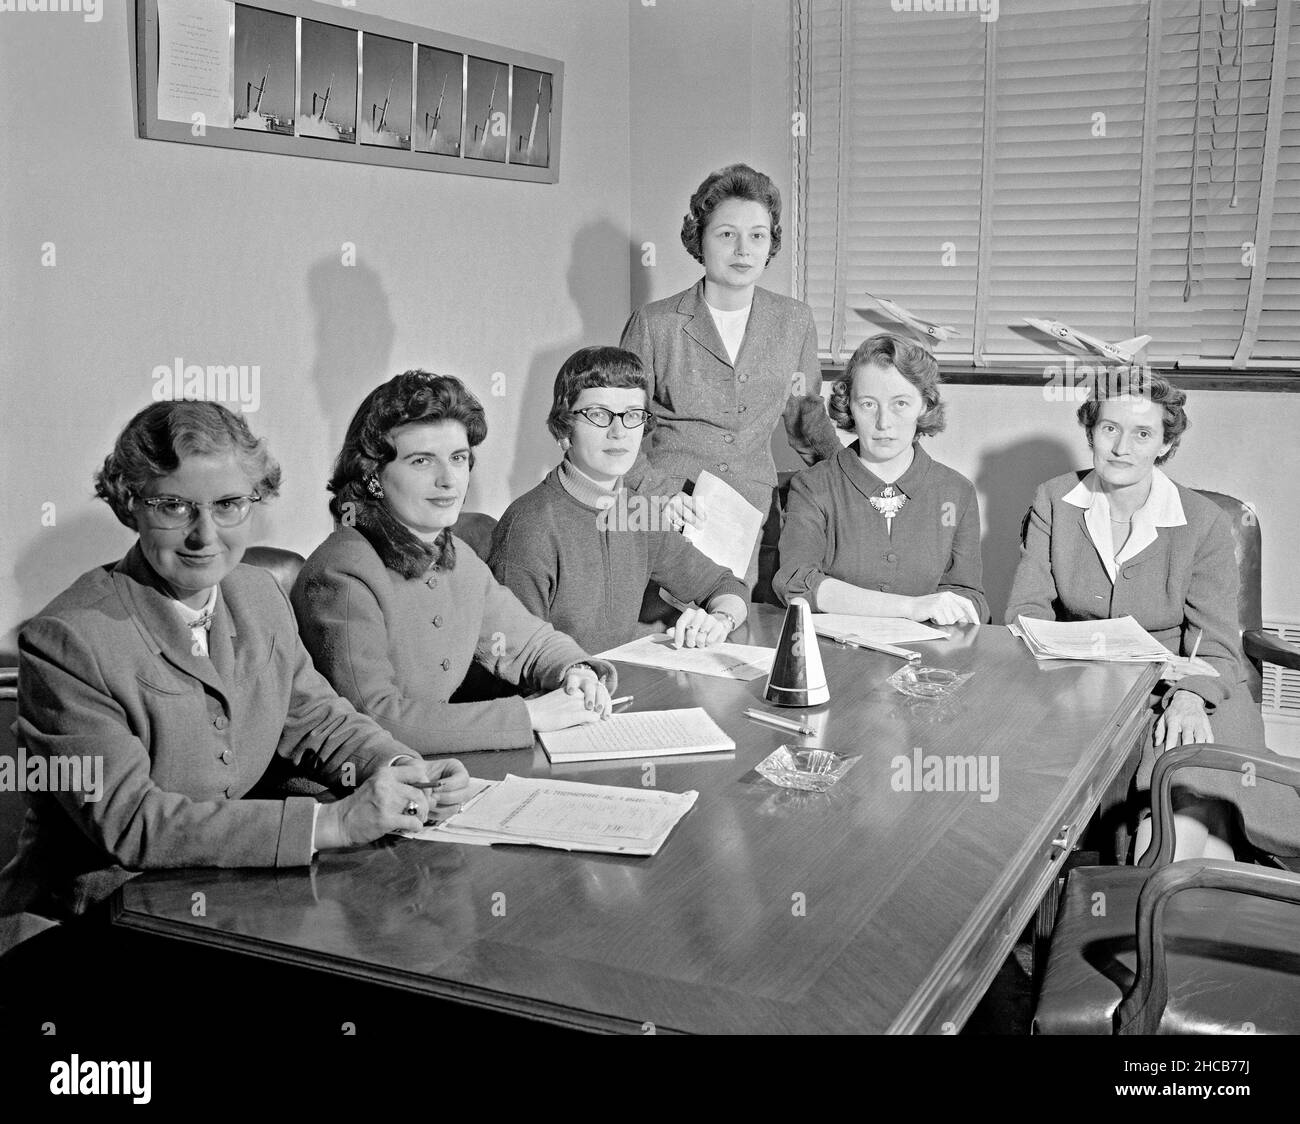 Women Scientists: Lucille Coltrane, Jean Clark Keating, Katherine Cullie Speegle, Doris 'Dot' Lee, Ruth Whitman, and Emily Stephens Mueller,Lucille Coltrane is at the far left. She was a computer and worked for Norm Crabill who provided positive identification. Lucille authored a NACA Research Memorandum, Investigation of Two Bluff Shapes in Axial Free Flight Over a Mach Number Range From 0.35 to 2.15 in 1958.  Next to Lucille is Jean Clark Keating. Jean was identified by Mary Woerner who said that both Jean and her husband Jerry are now deceased.  The third woman from the left is Katherine Cu Stock Photo